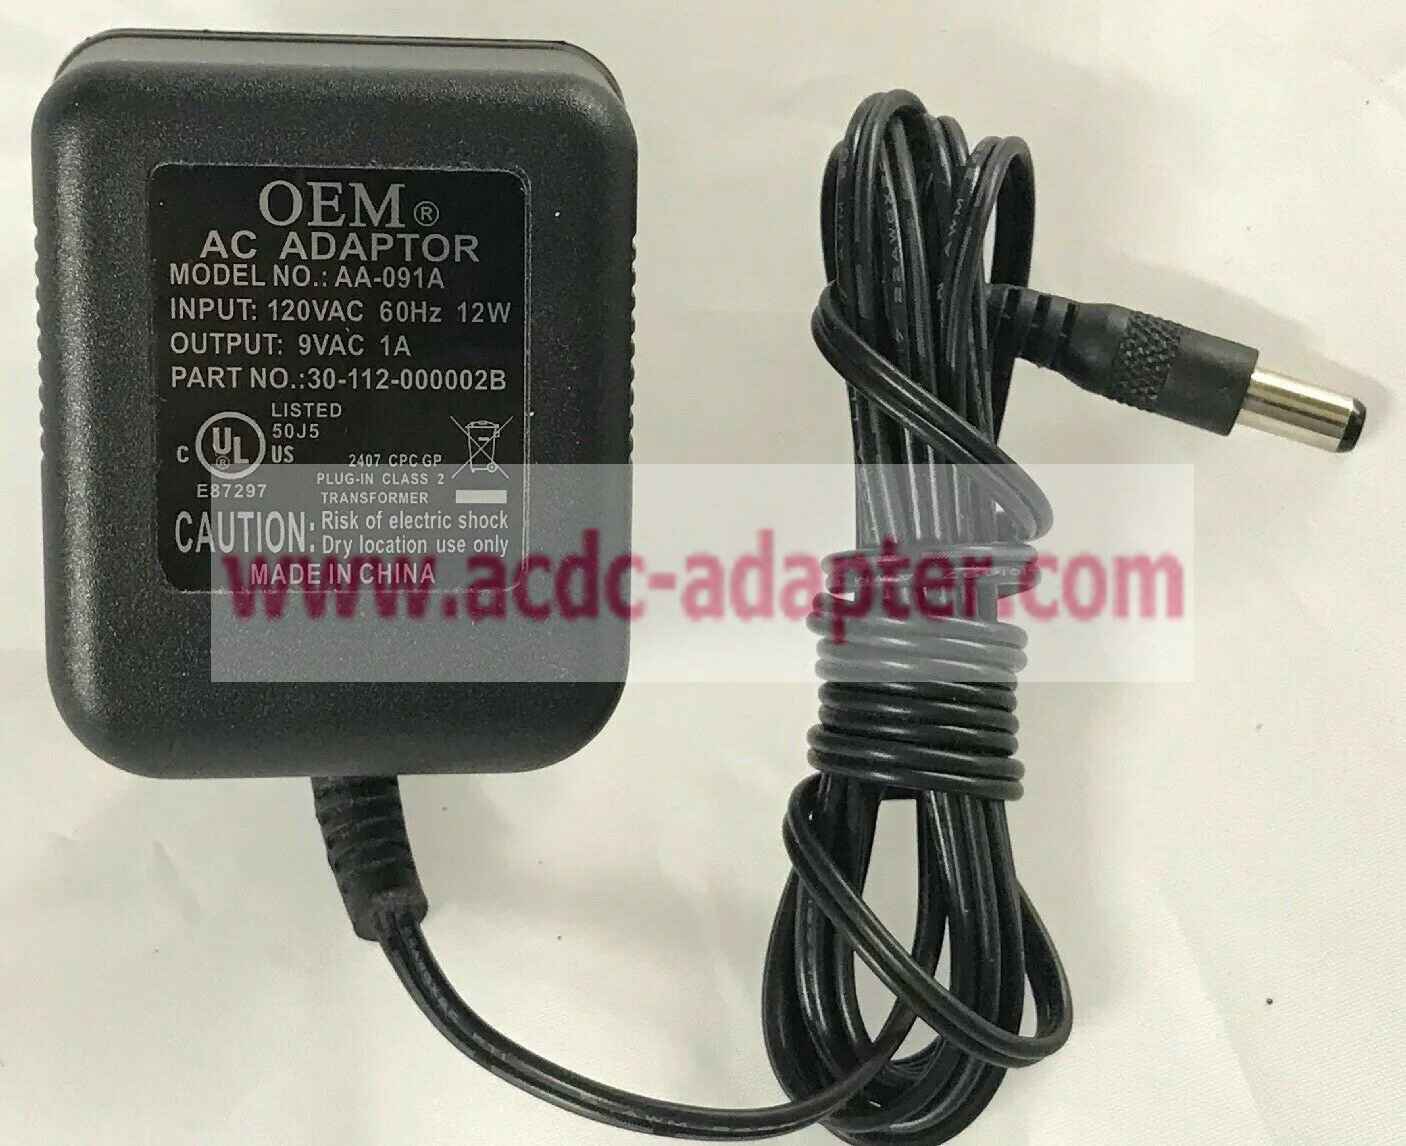 New 9VAC 1A AC Adaptor AA-091A 30-112-000002B Power Supply Charger - Click Image to Close